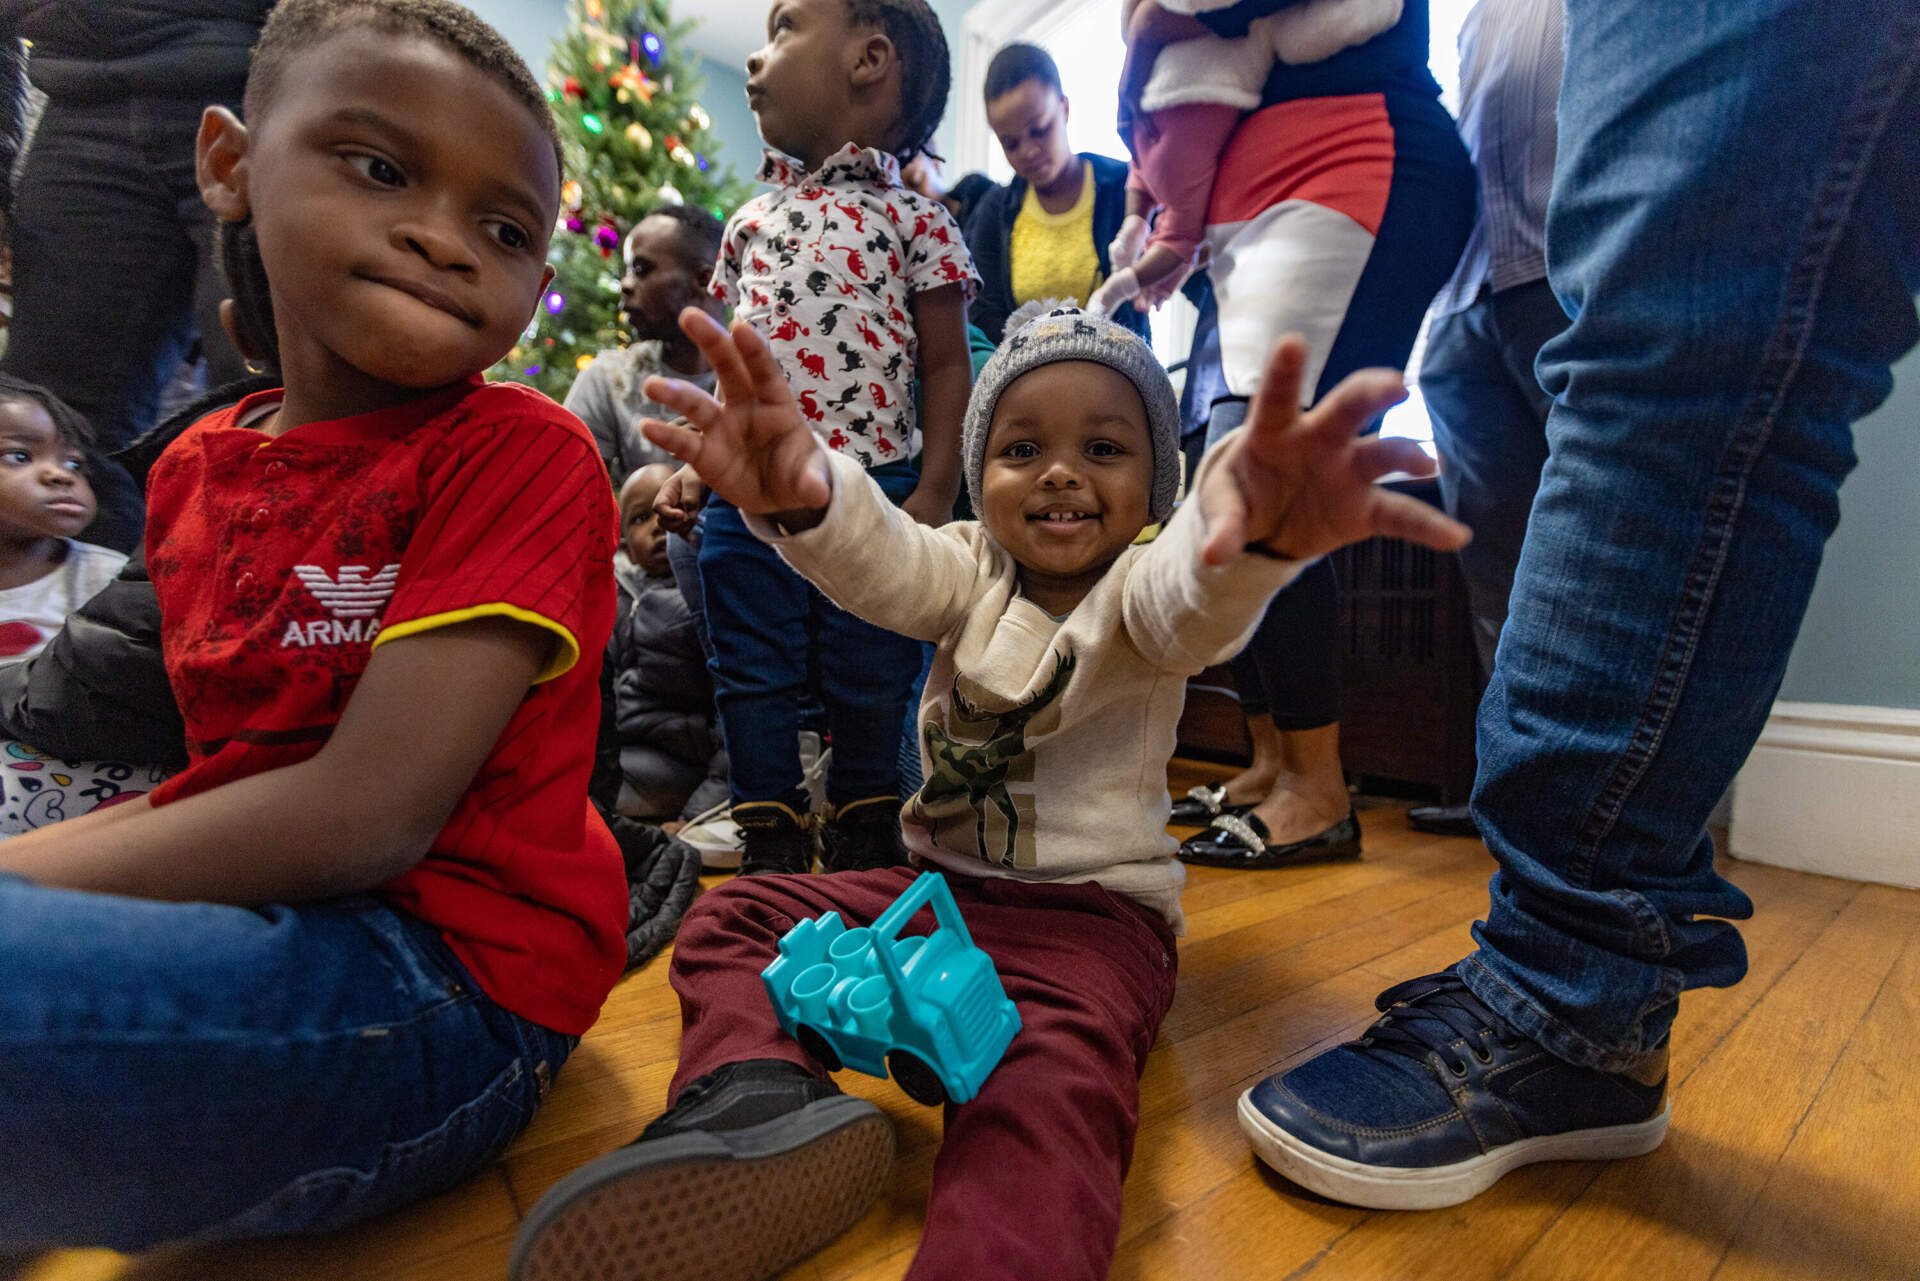 Migrant children from Haiti congregate around a Christmas tree in the community room at the Bethel AME Church rectory in Jamaica Plain. (Jesse Costa/WBUR)